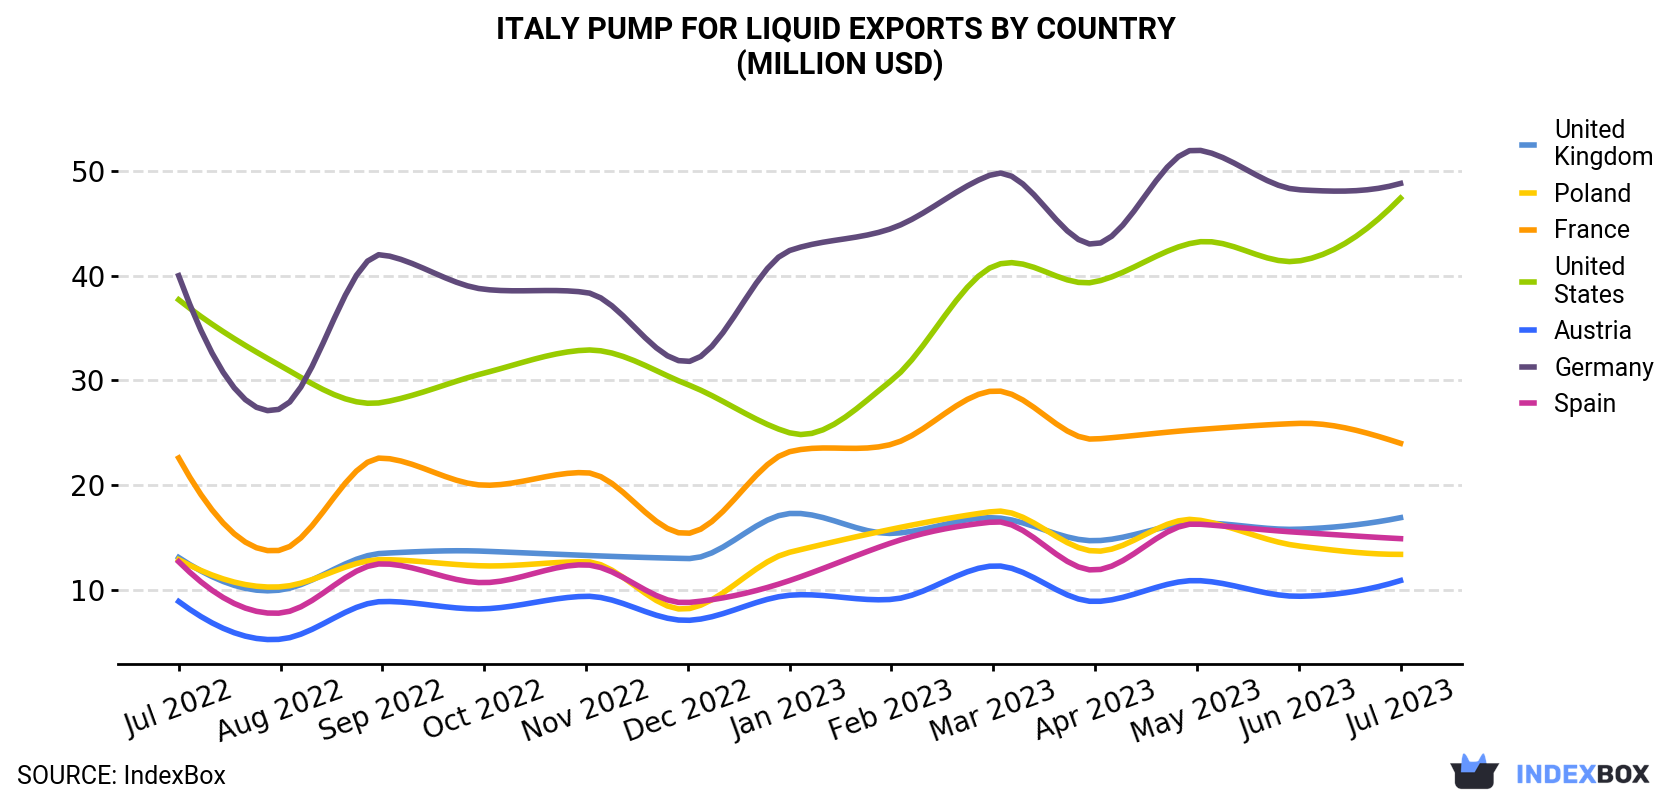 Italy Pump For Liquid Exports By Country (Million USD)